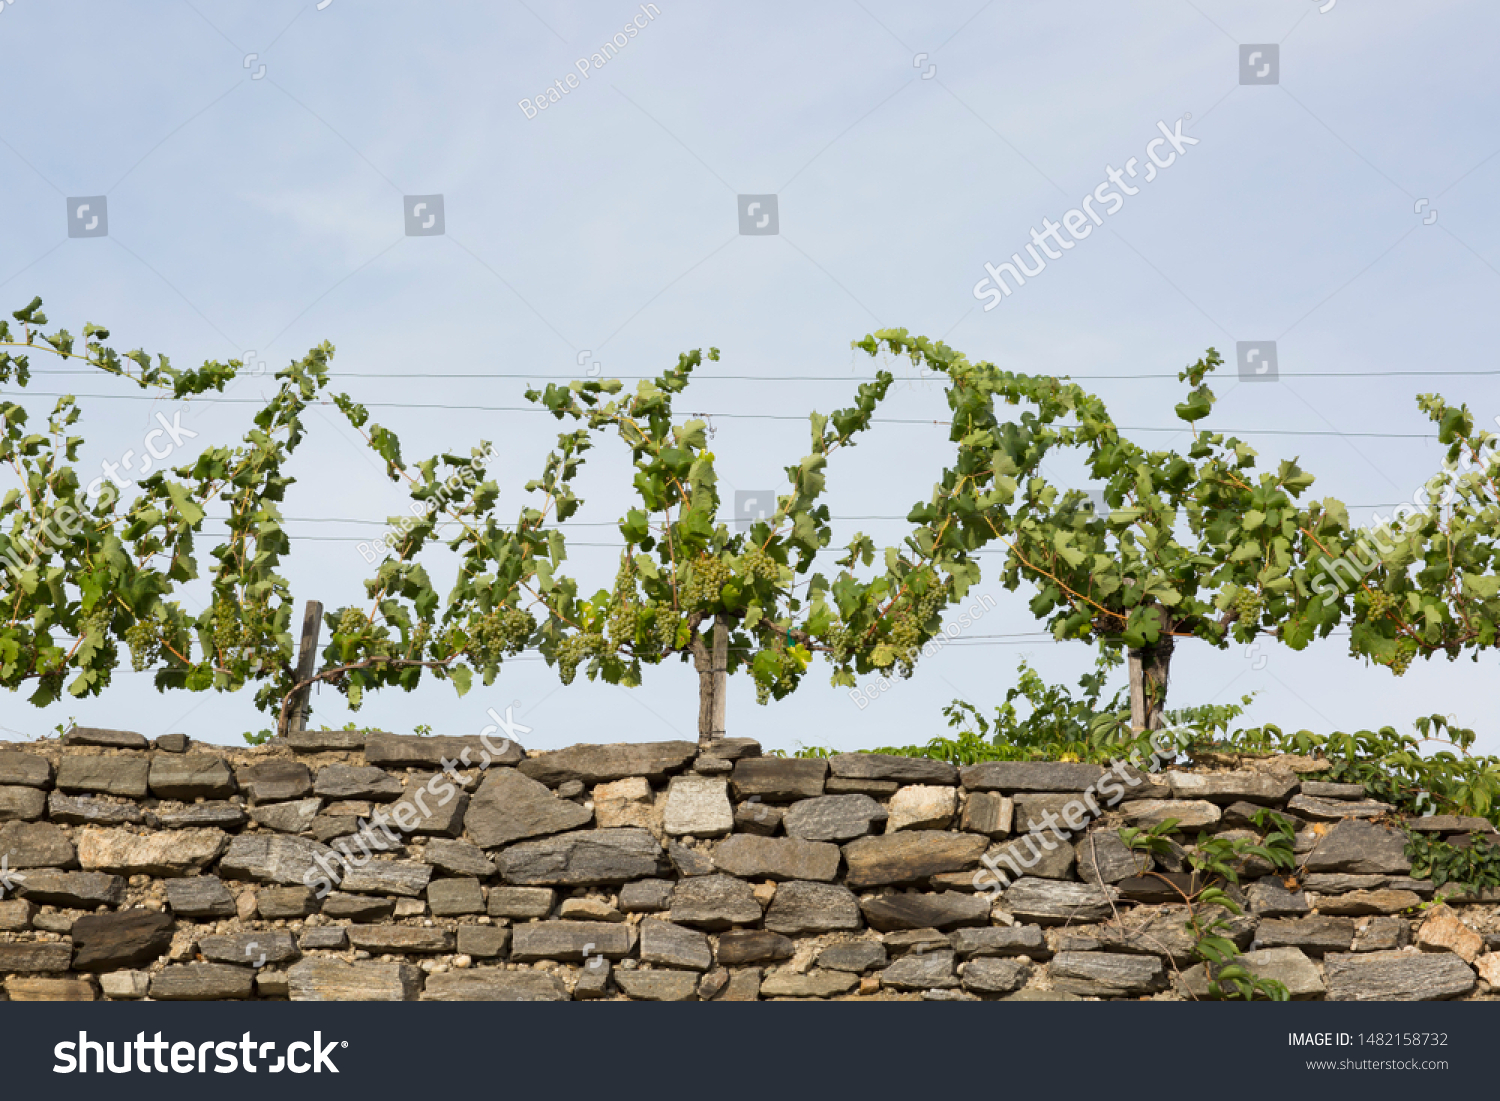 Grapevines Bunches White Grapes On Stone Stock Photo Edit Now